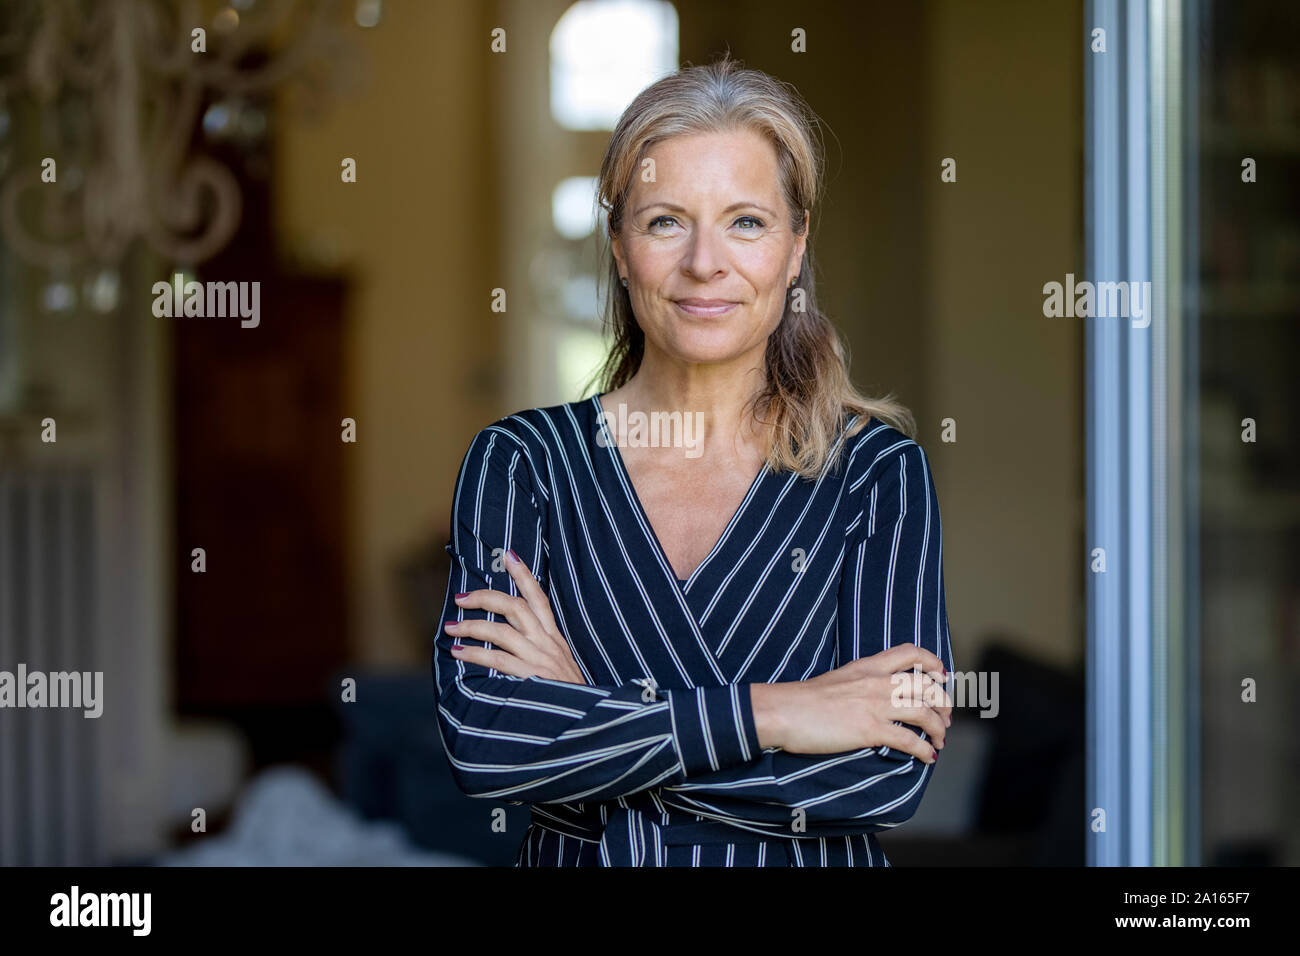 Portrait of smiling mature woman standing at opened terrace door Stock Photo